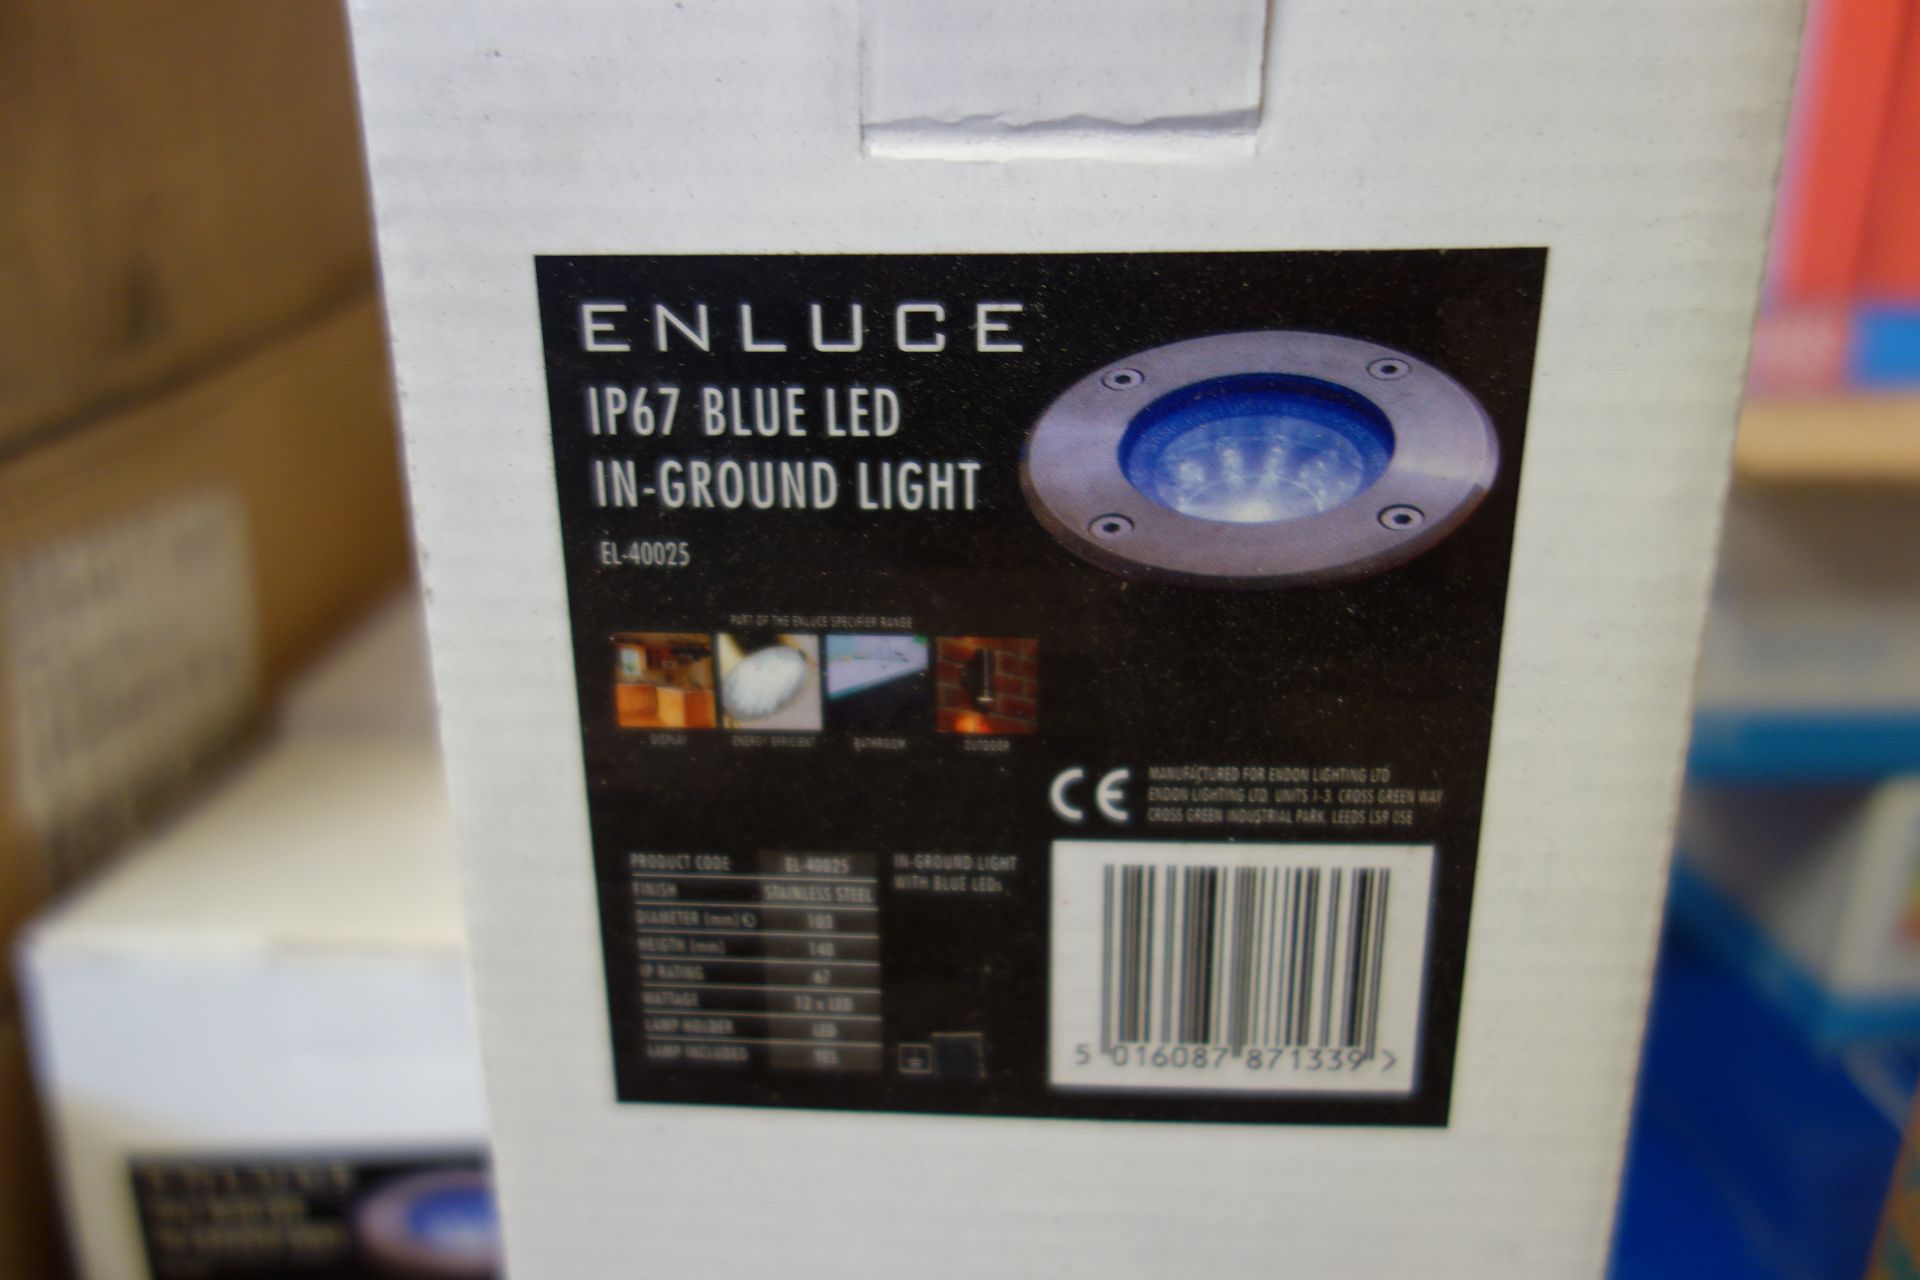 12 X ENLUCE EL40025 IN-GROUND BLUE LED LIGHTS IP67 Stainless Steel Finish